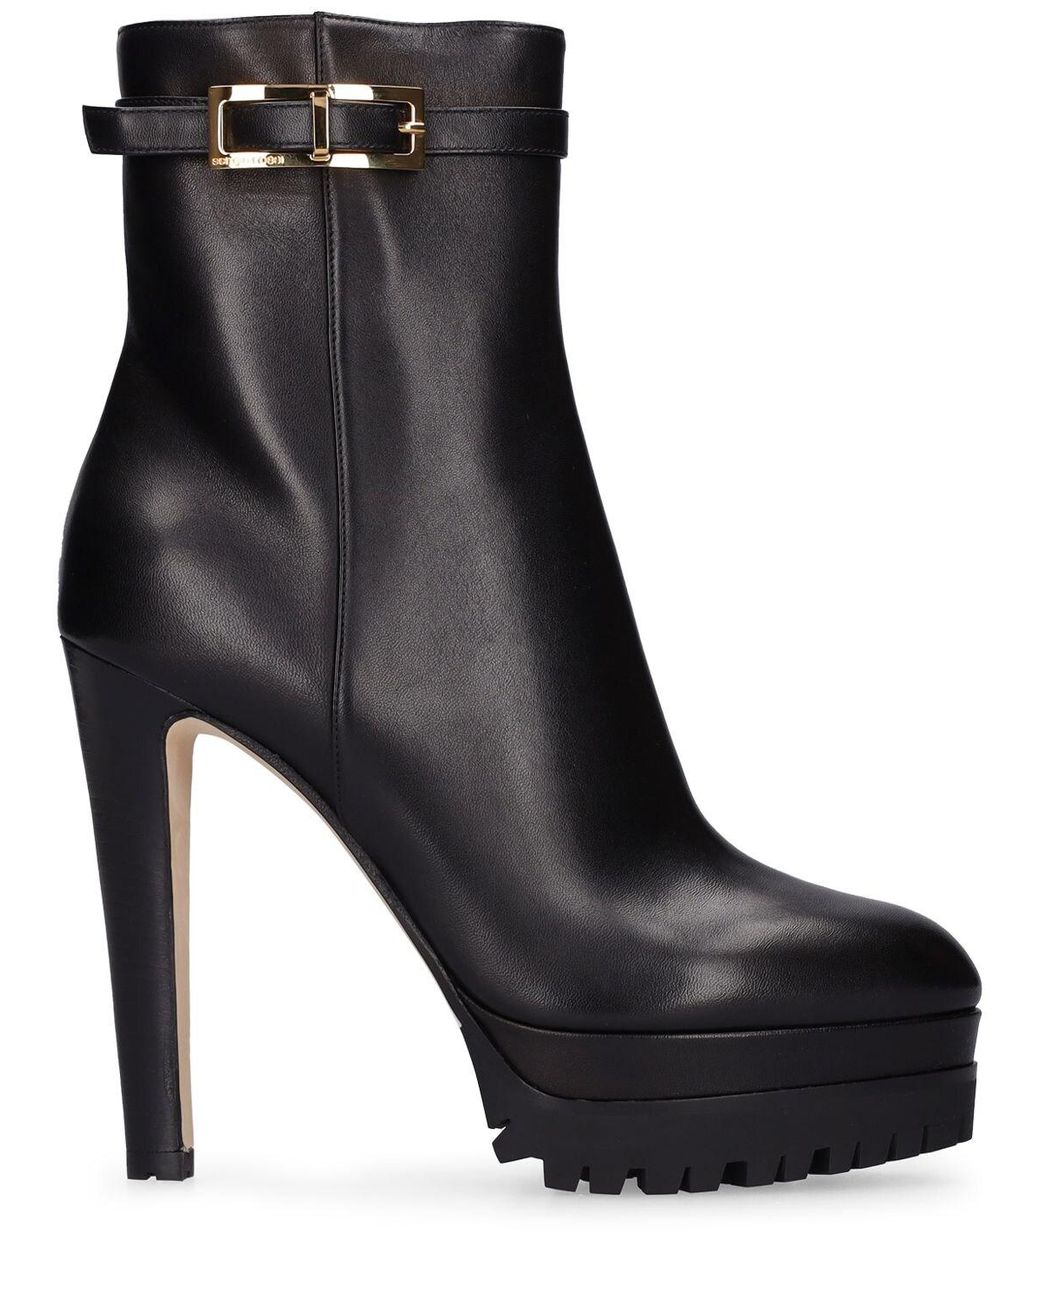 Sergio Rossi 130mm Sr Nora Leather Platform Boots in Black | Lyst